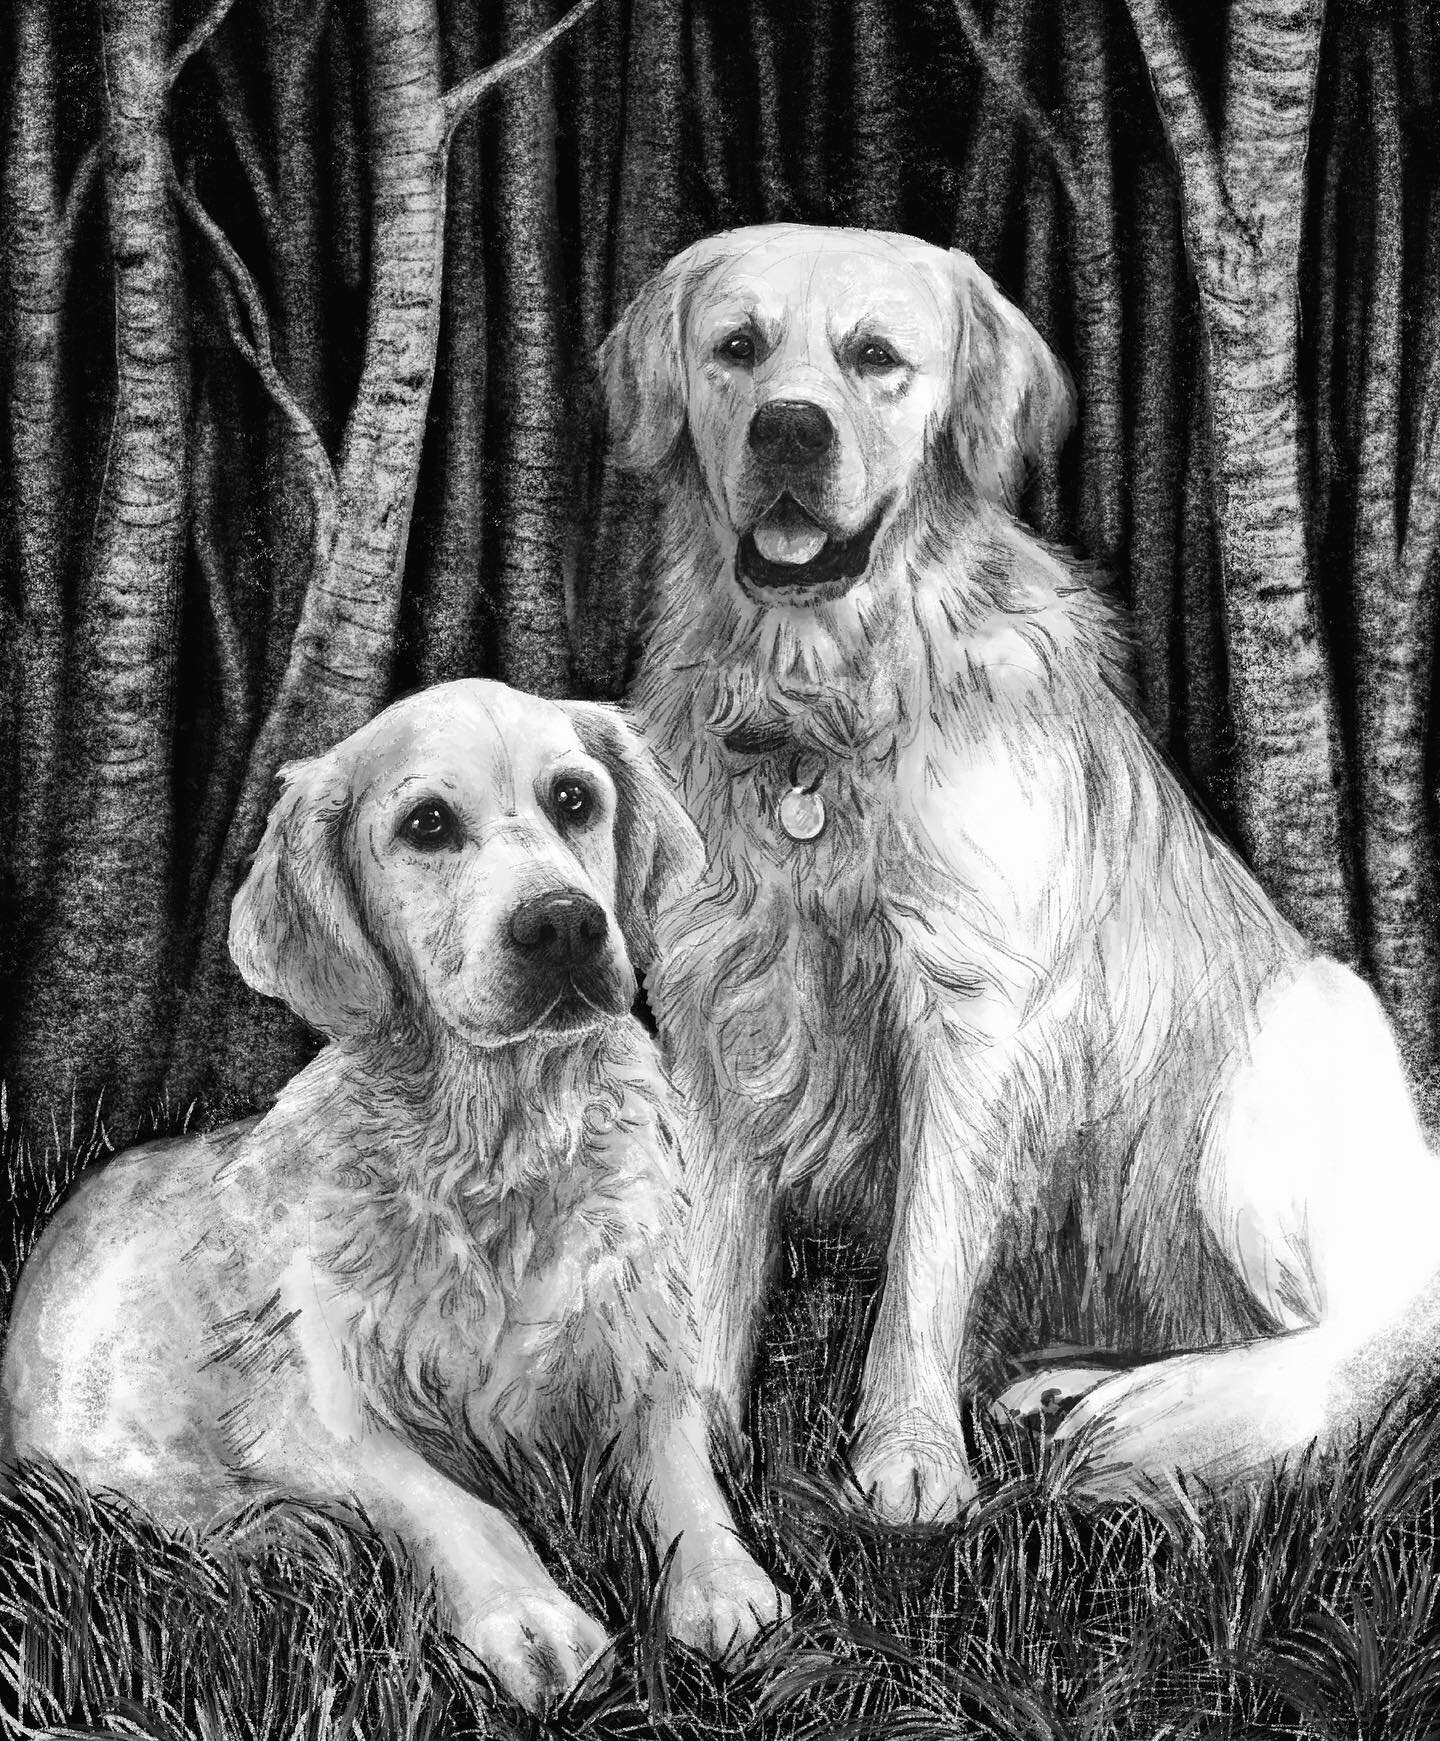 Completed this doggo portrait this week for a friend, I am no longer taking commissions as a rule but how could I have resisted these angels? 🦮🦮